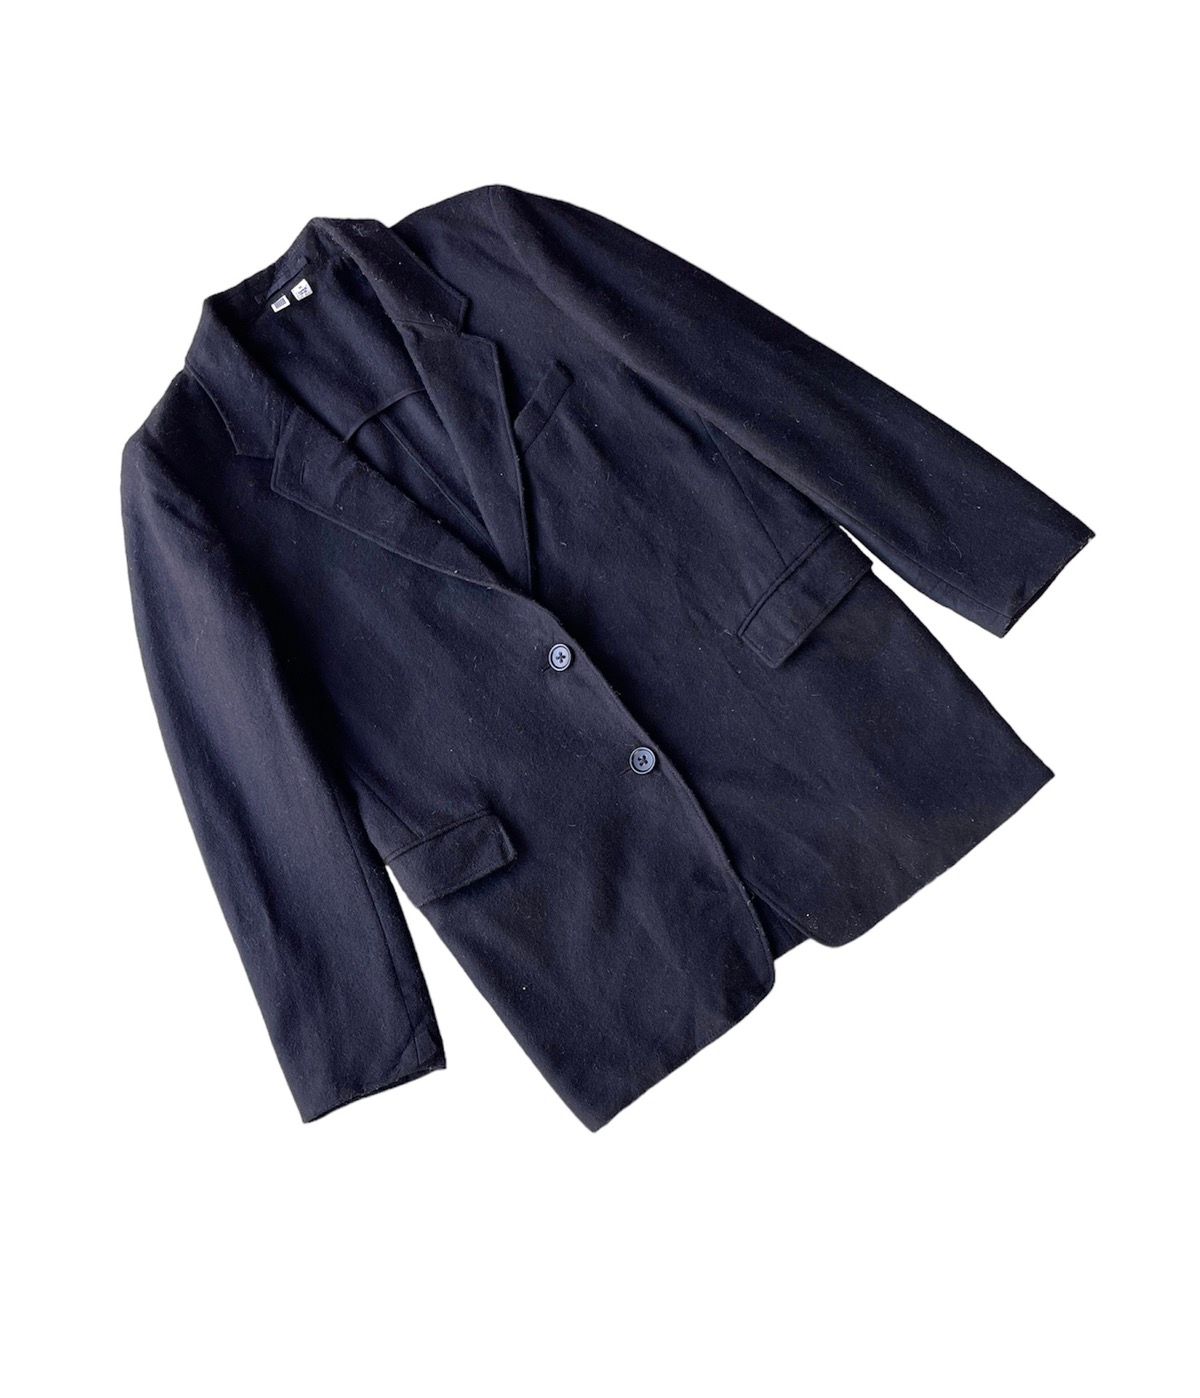 UNIQLO UNDERCOVER WOOL SUIT JACKET - 4